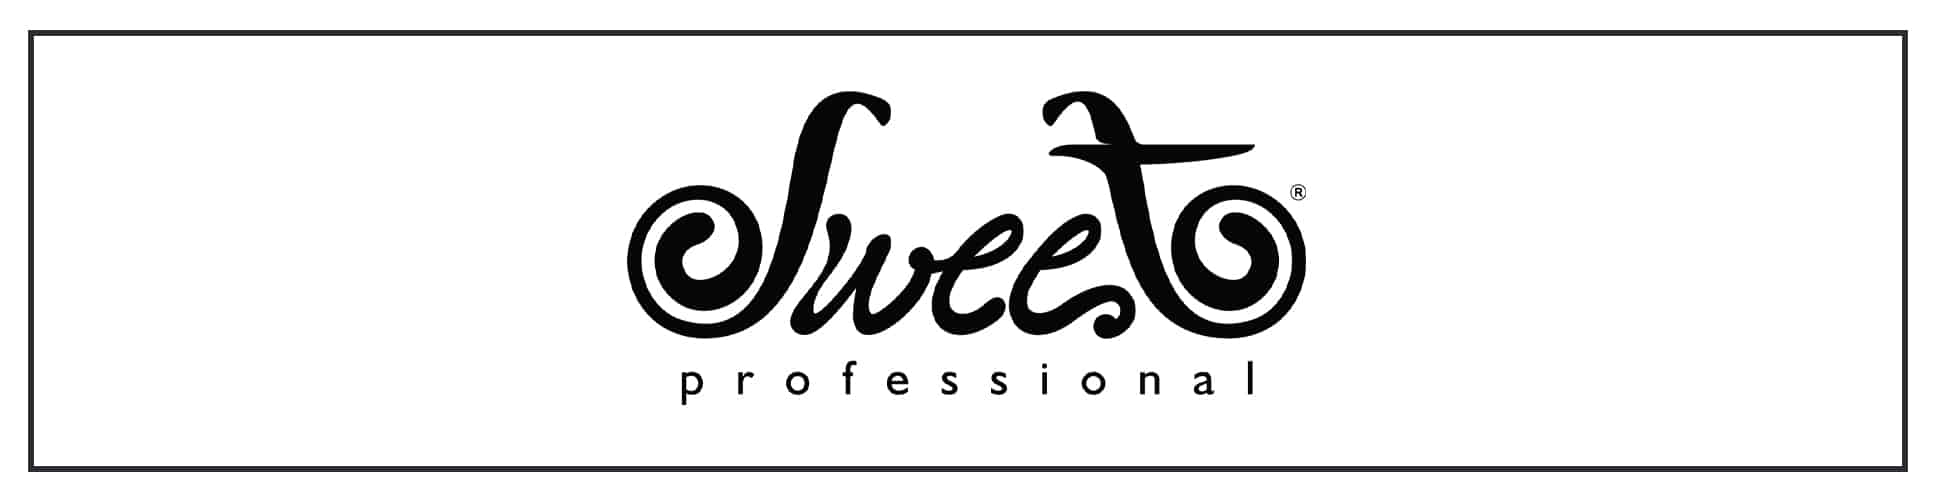 The sweet professional logo on a white background.